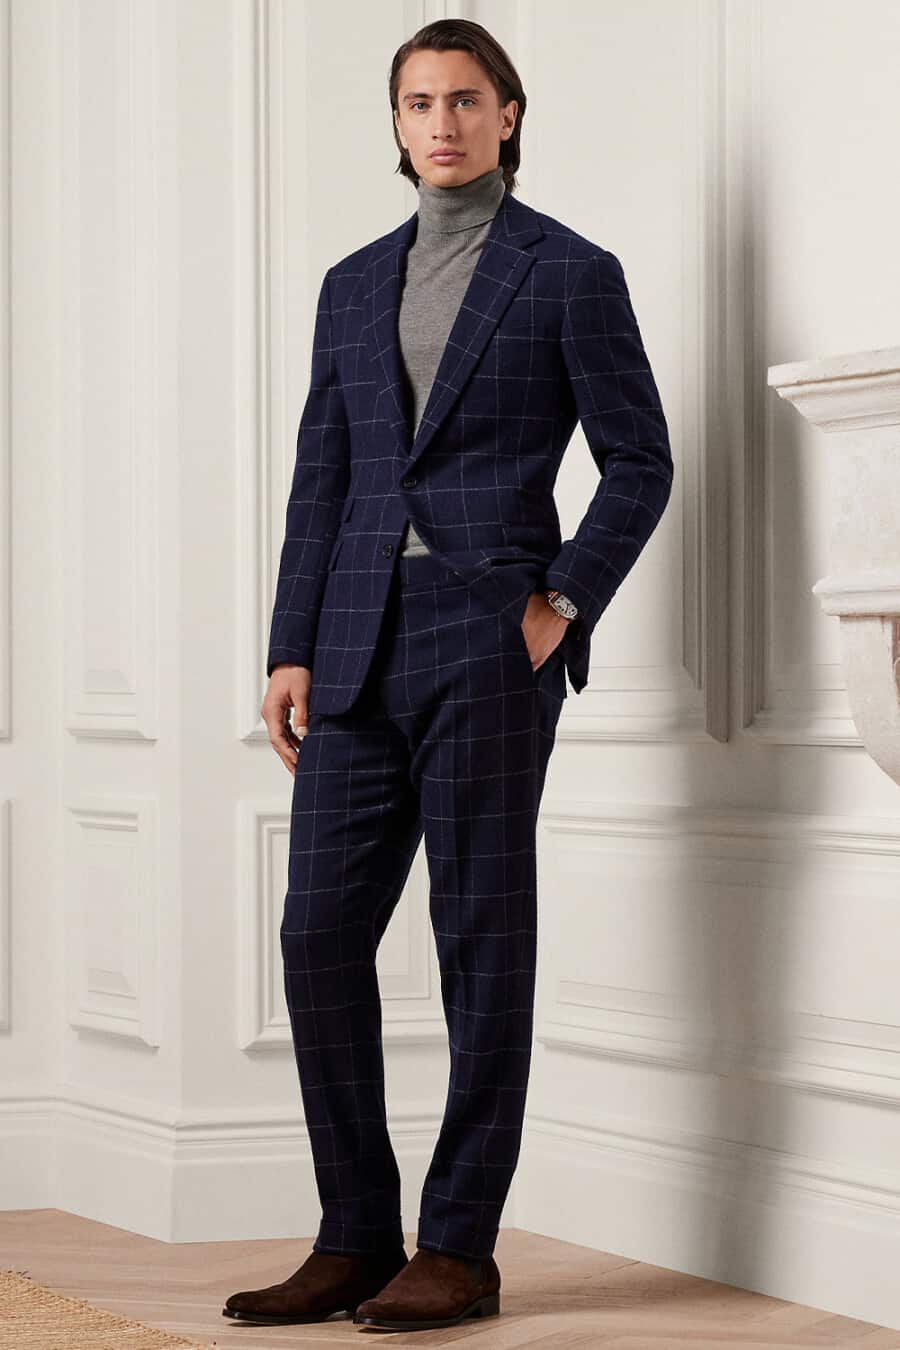 Men's navy windowpane check suit, grey turtleneck and brown suede Chelsea boots outfit